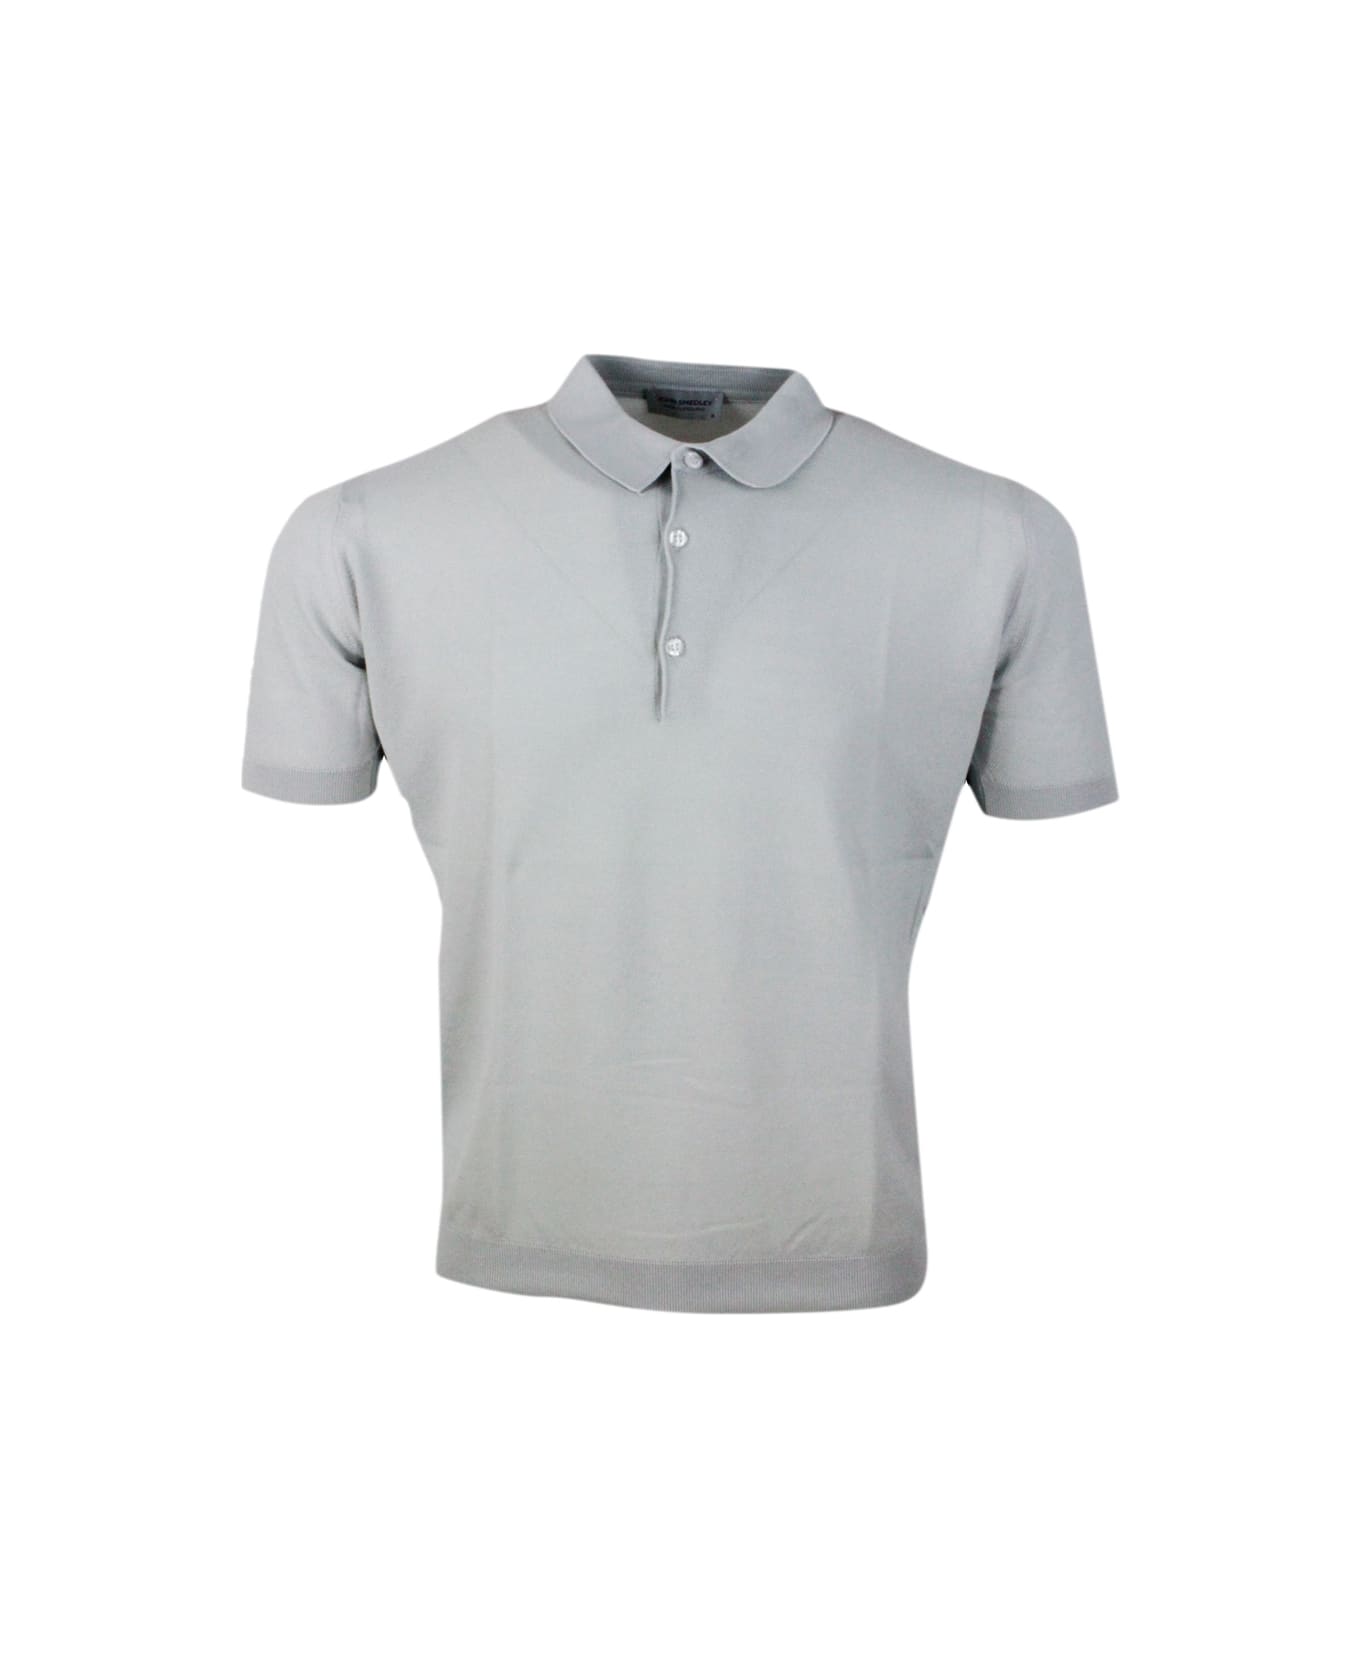 John Smedley Short-sleeved Polo Shirt In Extrafine Piqué Cotton Thread With Three Buttons - Grey